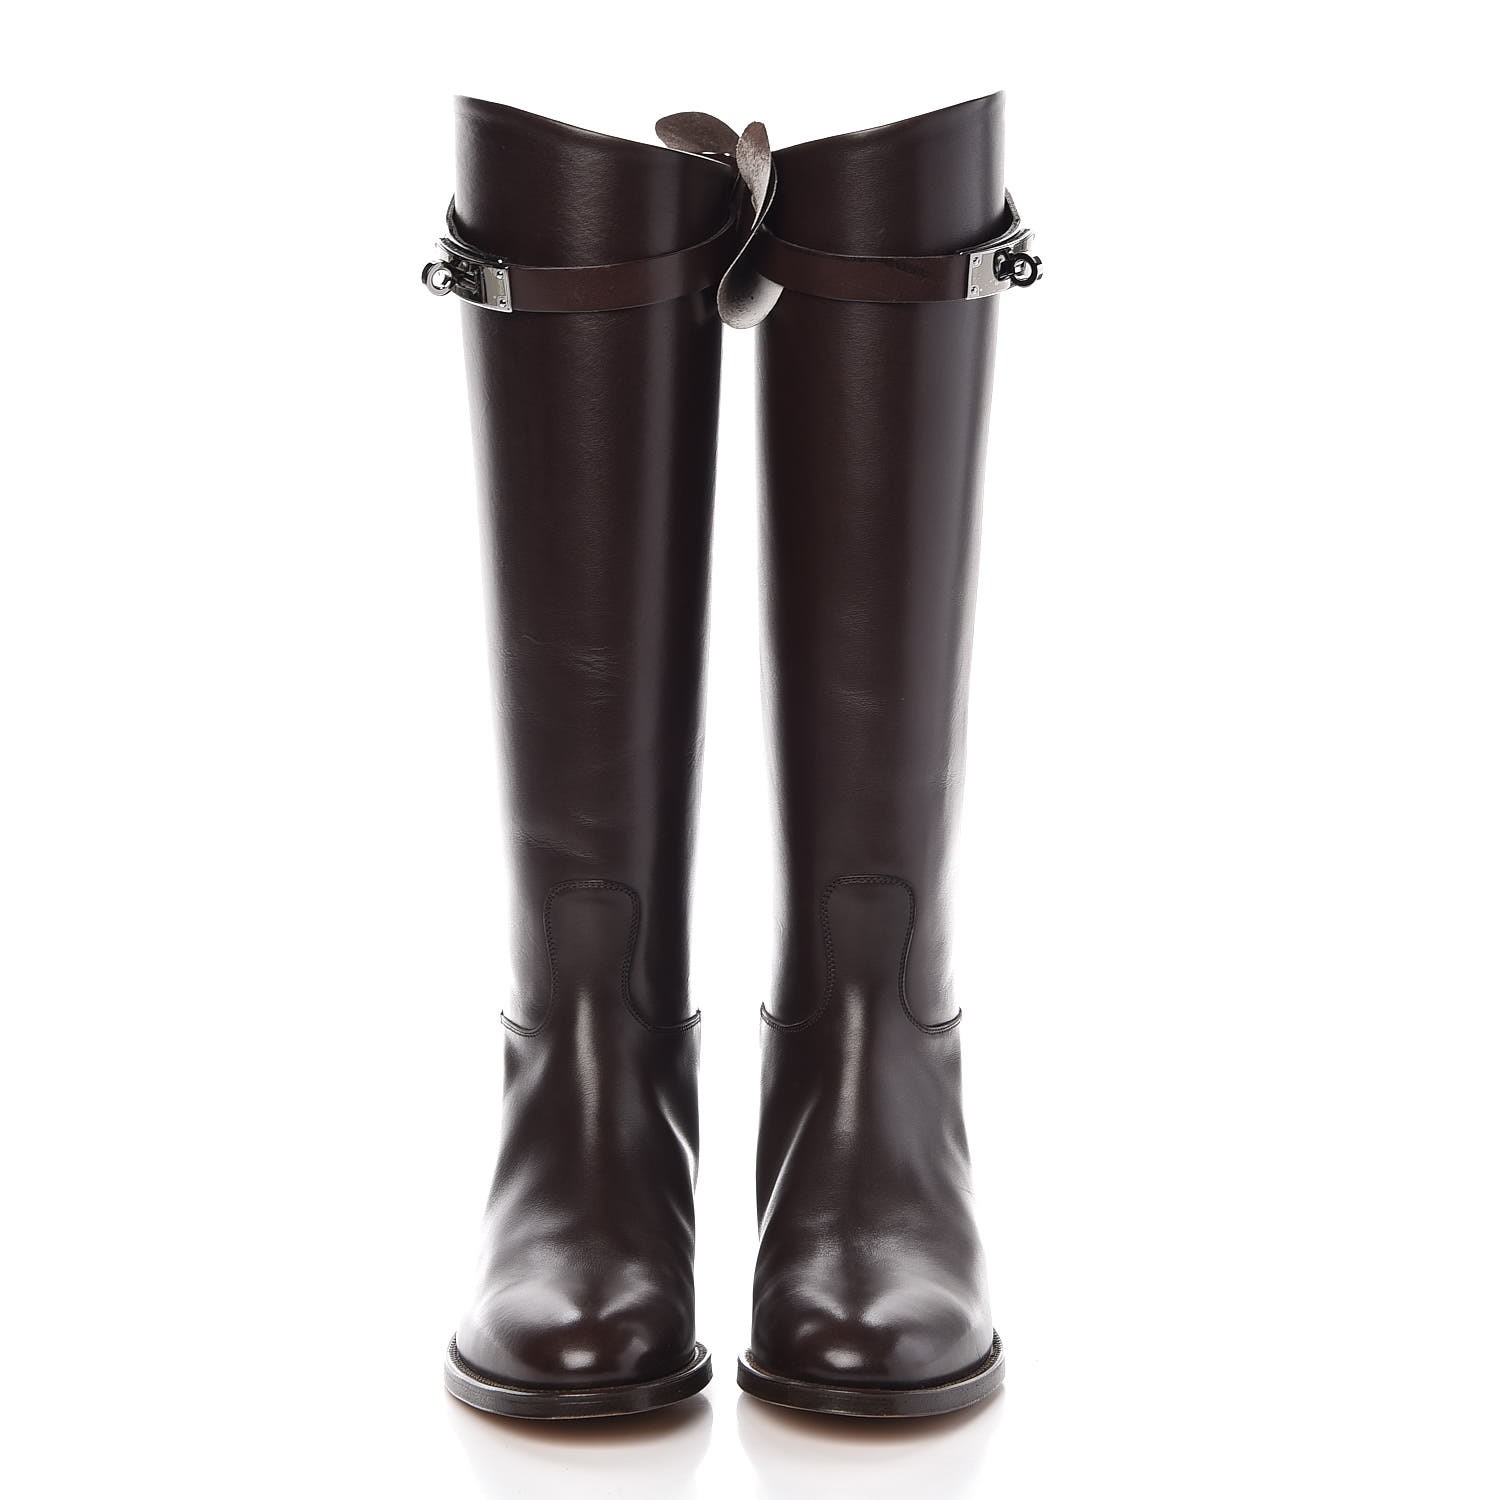 HERMES Box Kelly Jumping Boots 35.5 Chocolate 320396